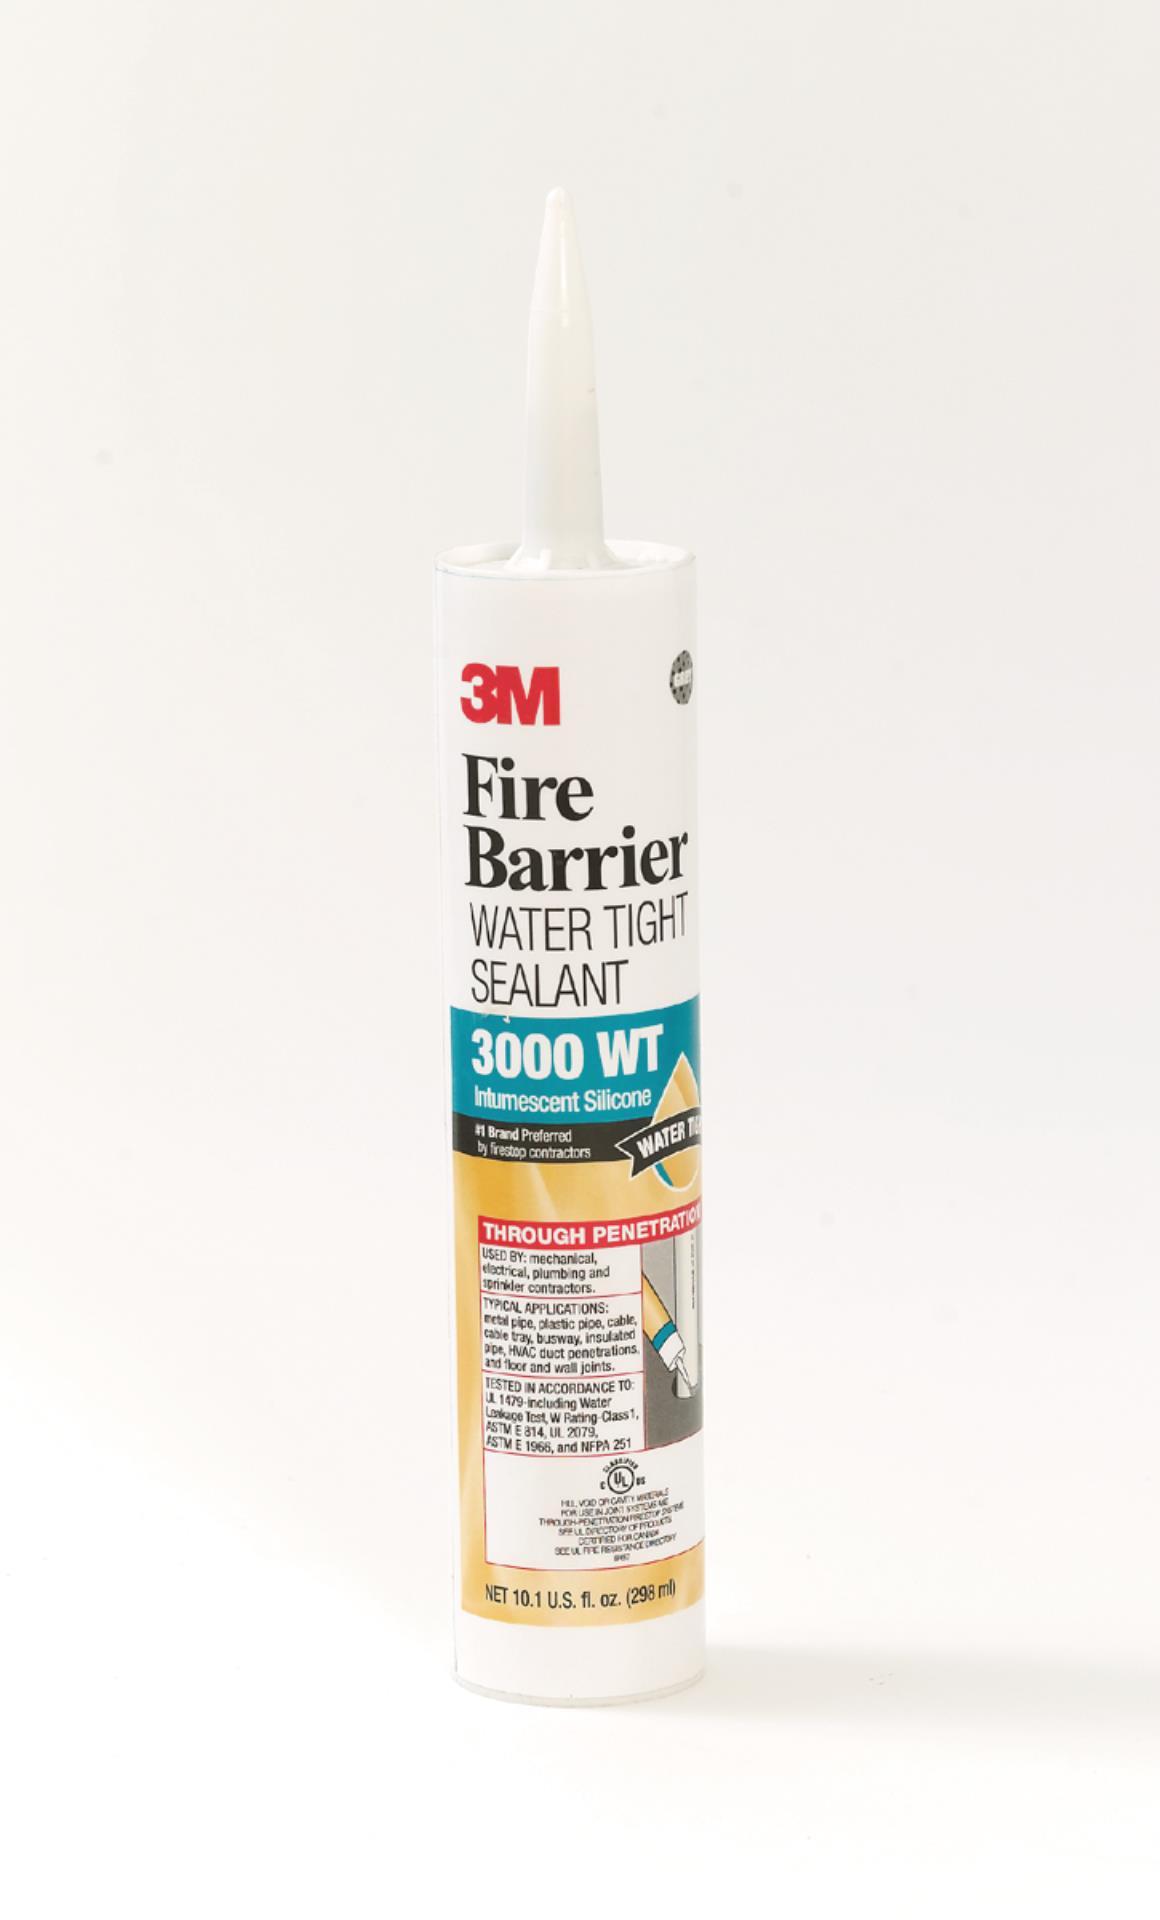 7000059413 - 3M™ Fire Barrier Water Tight Sealant 3000 WT, Gray, 20 fl oz Sausage Pack, 12/case